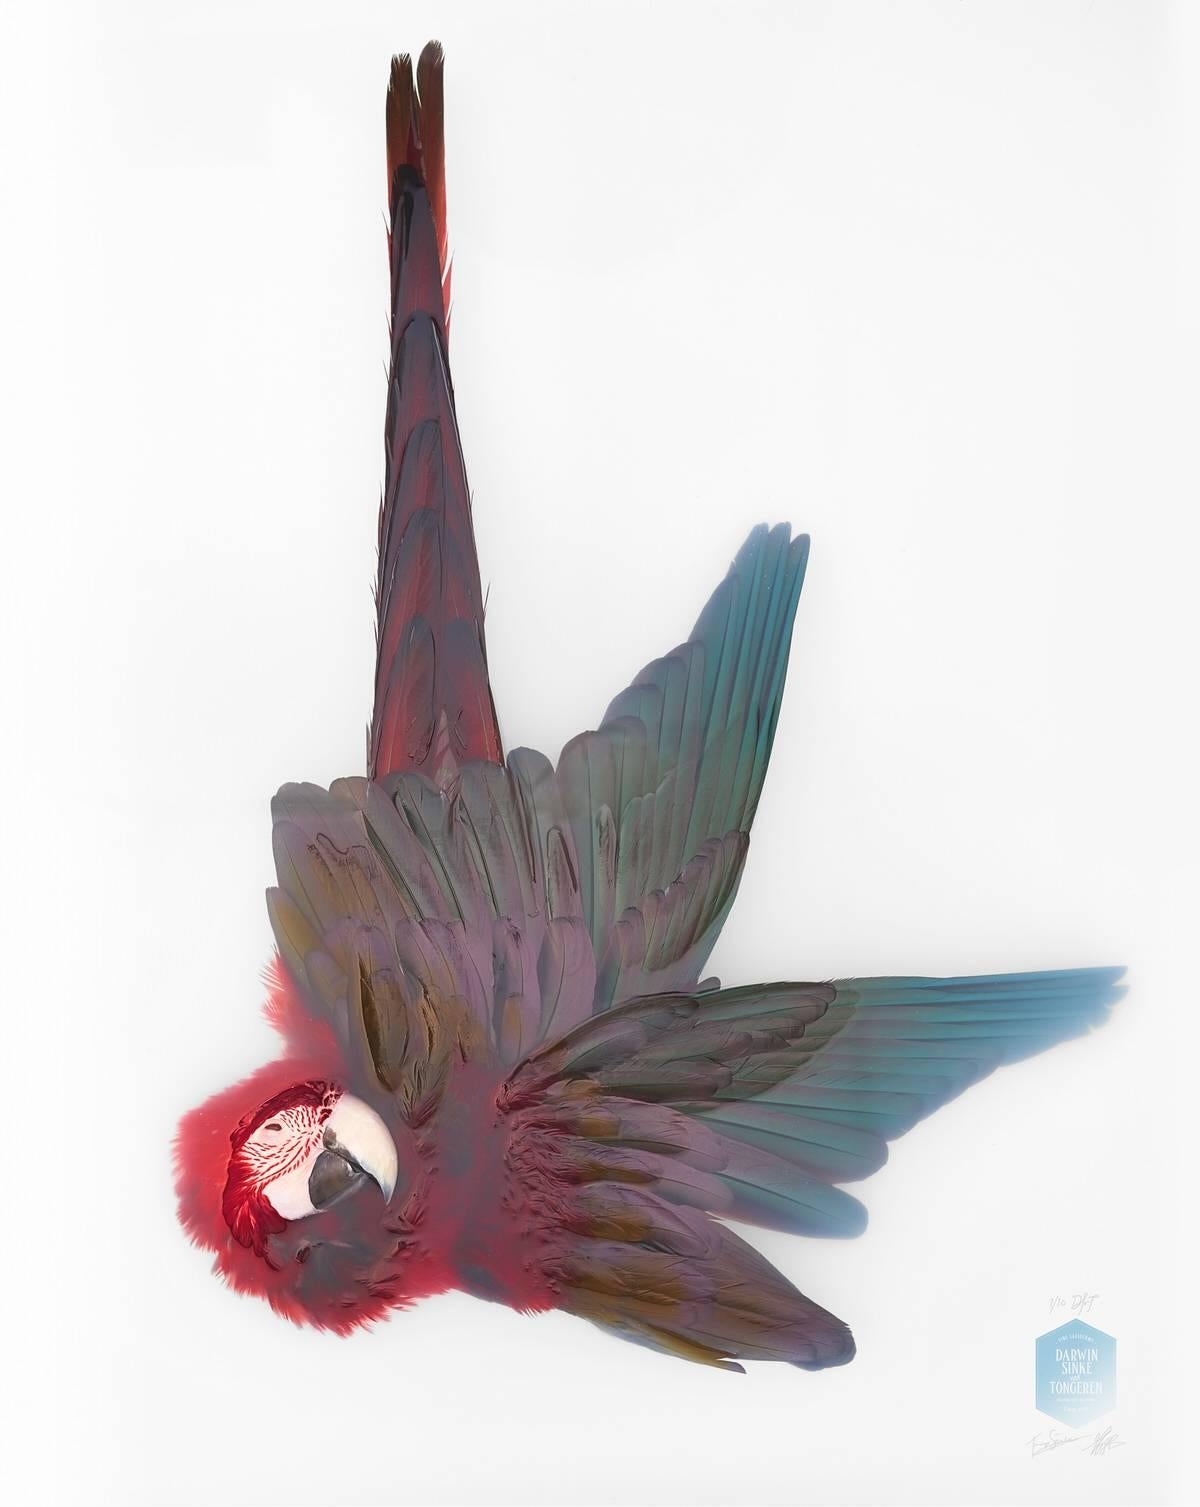 Unknown pose by Green-winged Macaw is nr. 2/10.

Size:
160 x 160 cm (63 x 63 in).
Size framed (optional).
174 x 174 cm (68.5 x 68.5 in).
 
Medium.
Giclée fine art print on Hahnemuehle photo rag ultra smooth.

About the artists:
Jaap